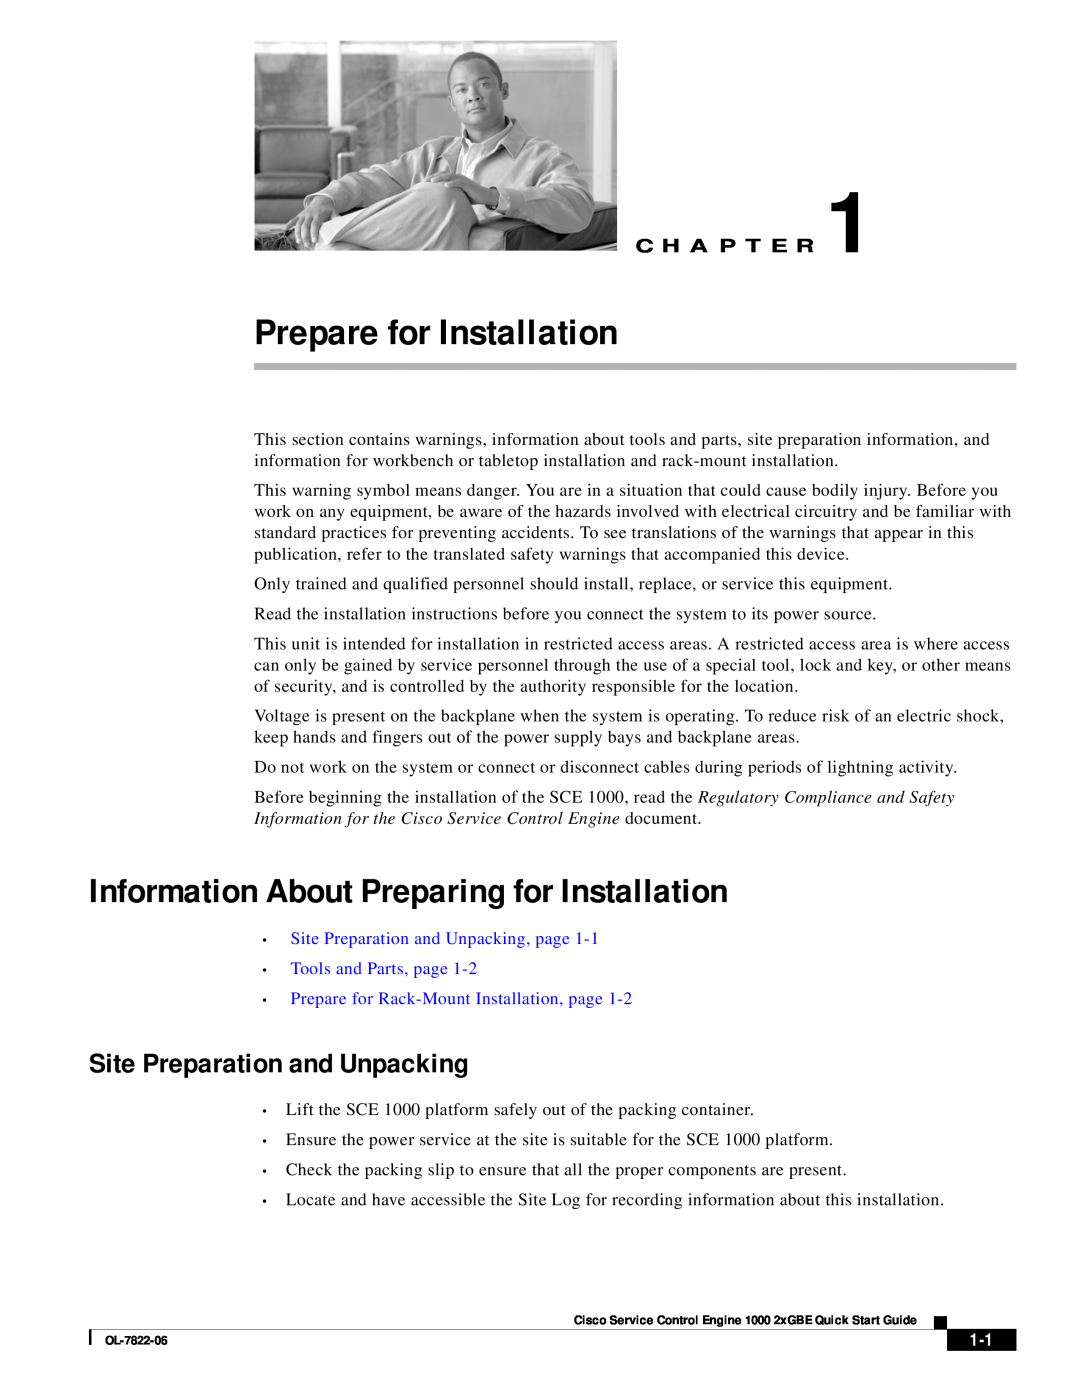 Cisco Systems OL-7822-06 quick start Prepare for Installation, Information About Preparing for Installation, C H A P T E R 